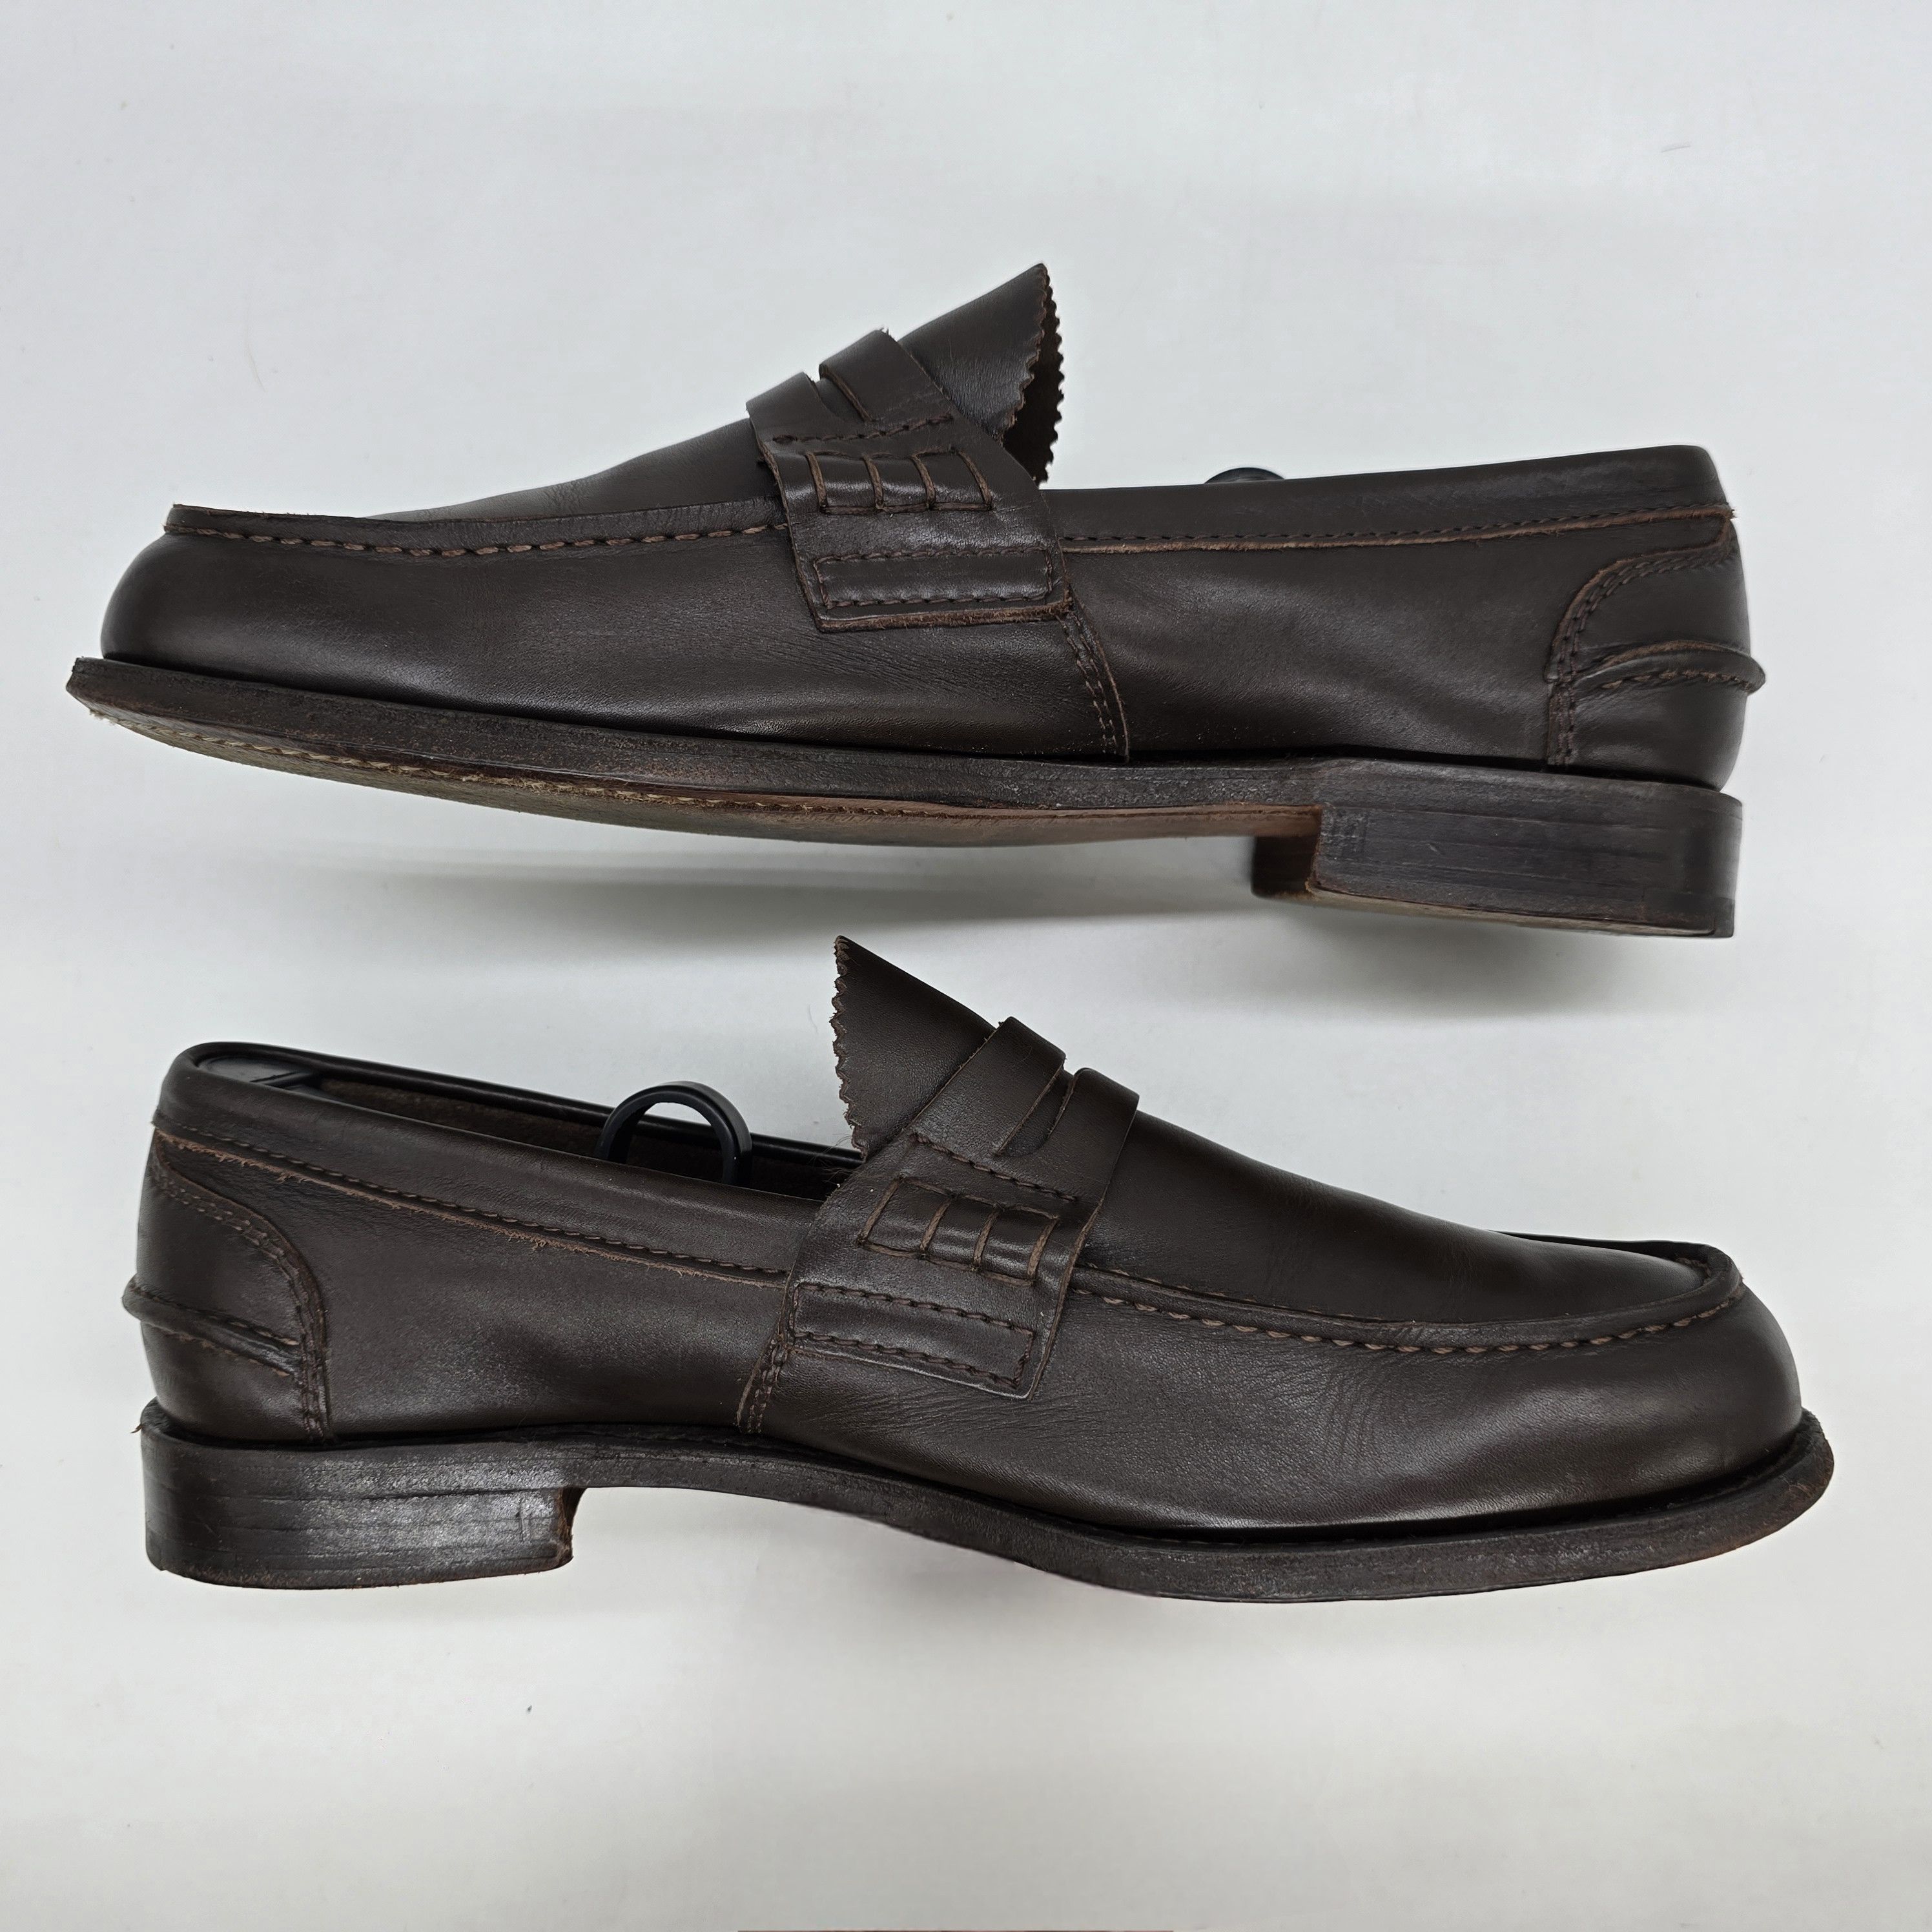 Churchs - Pembrey Leather Loafers - 6